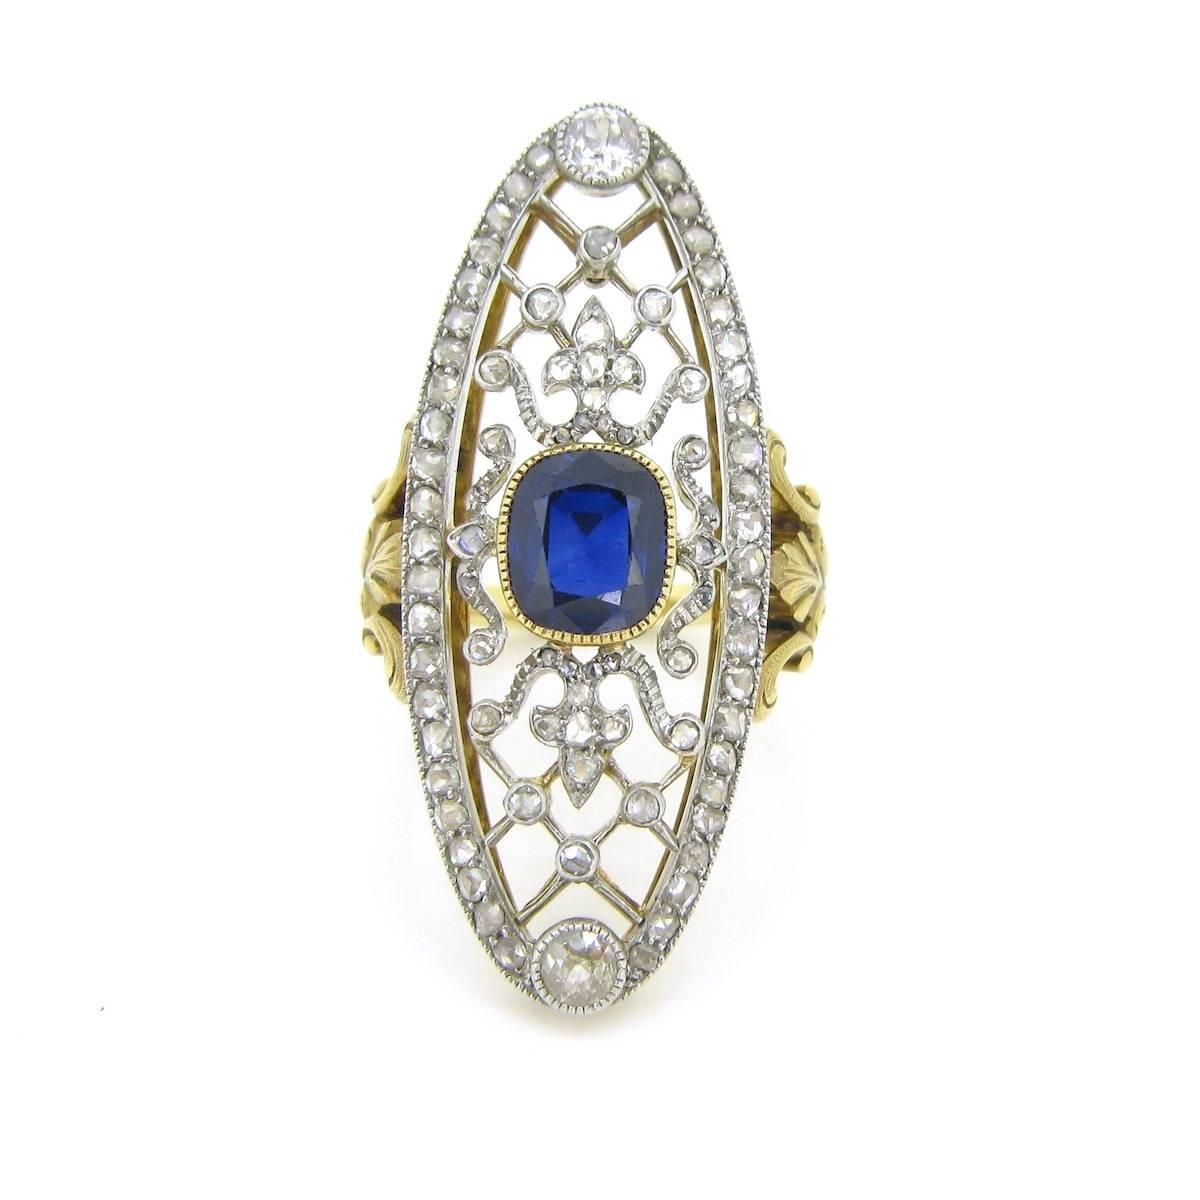 This amazing ring features in its center a deep blue sapphire set into a millegrain 18kt gold setting. It is surrounded with a beautiful hairnet and volutes design adorned with rose cut diamonds. The ellipse is magnified with 46 rose cut diamonds